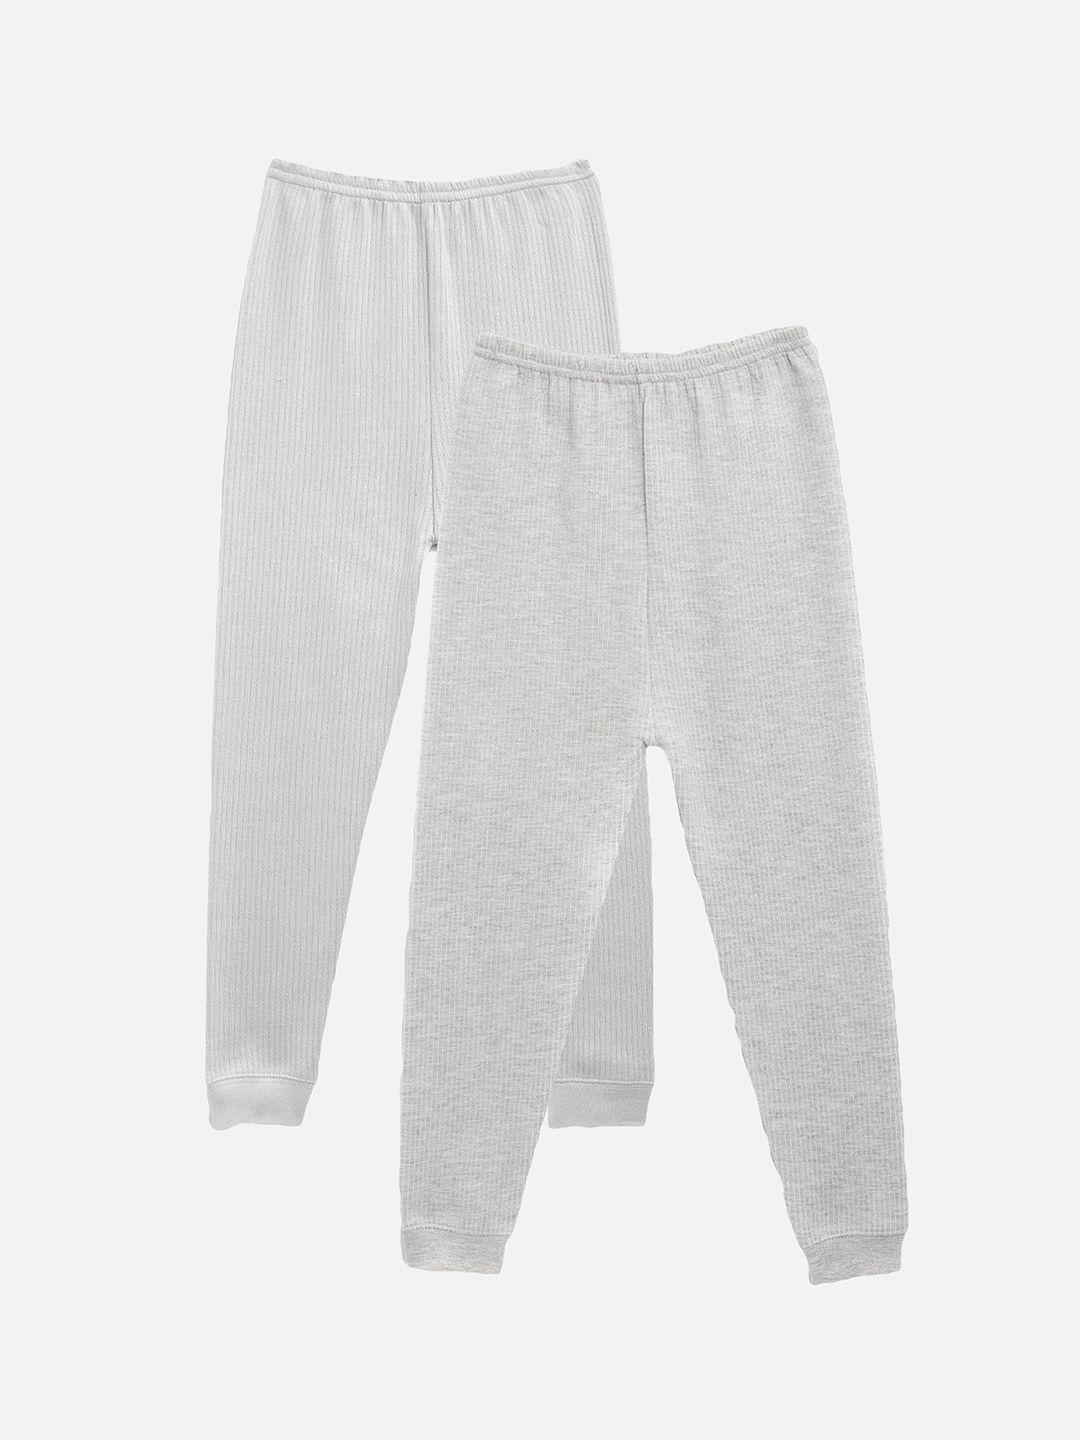 kanvin-boys-pack-of-2-grey-thermal-bottoms